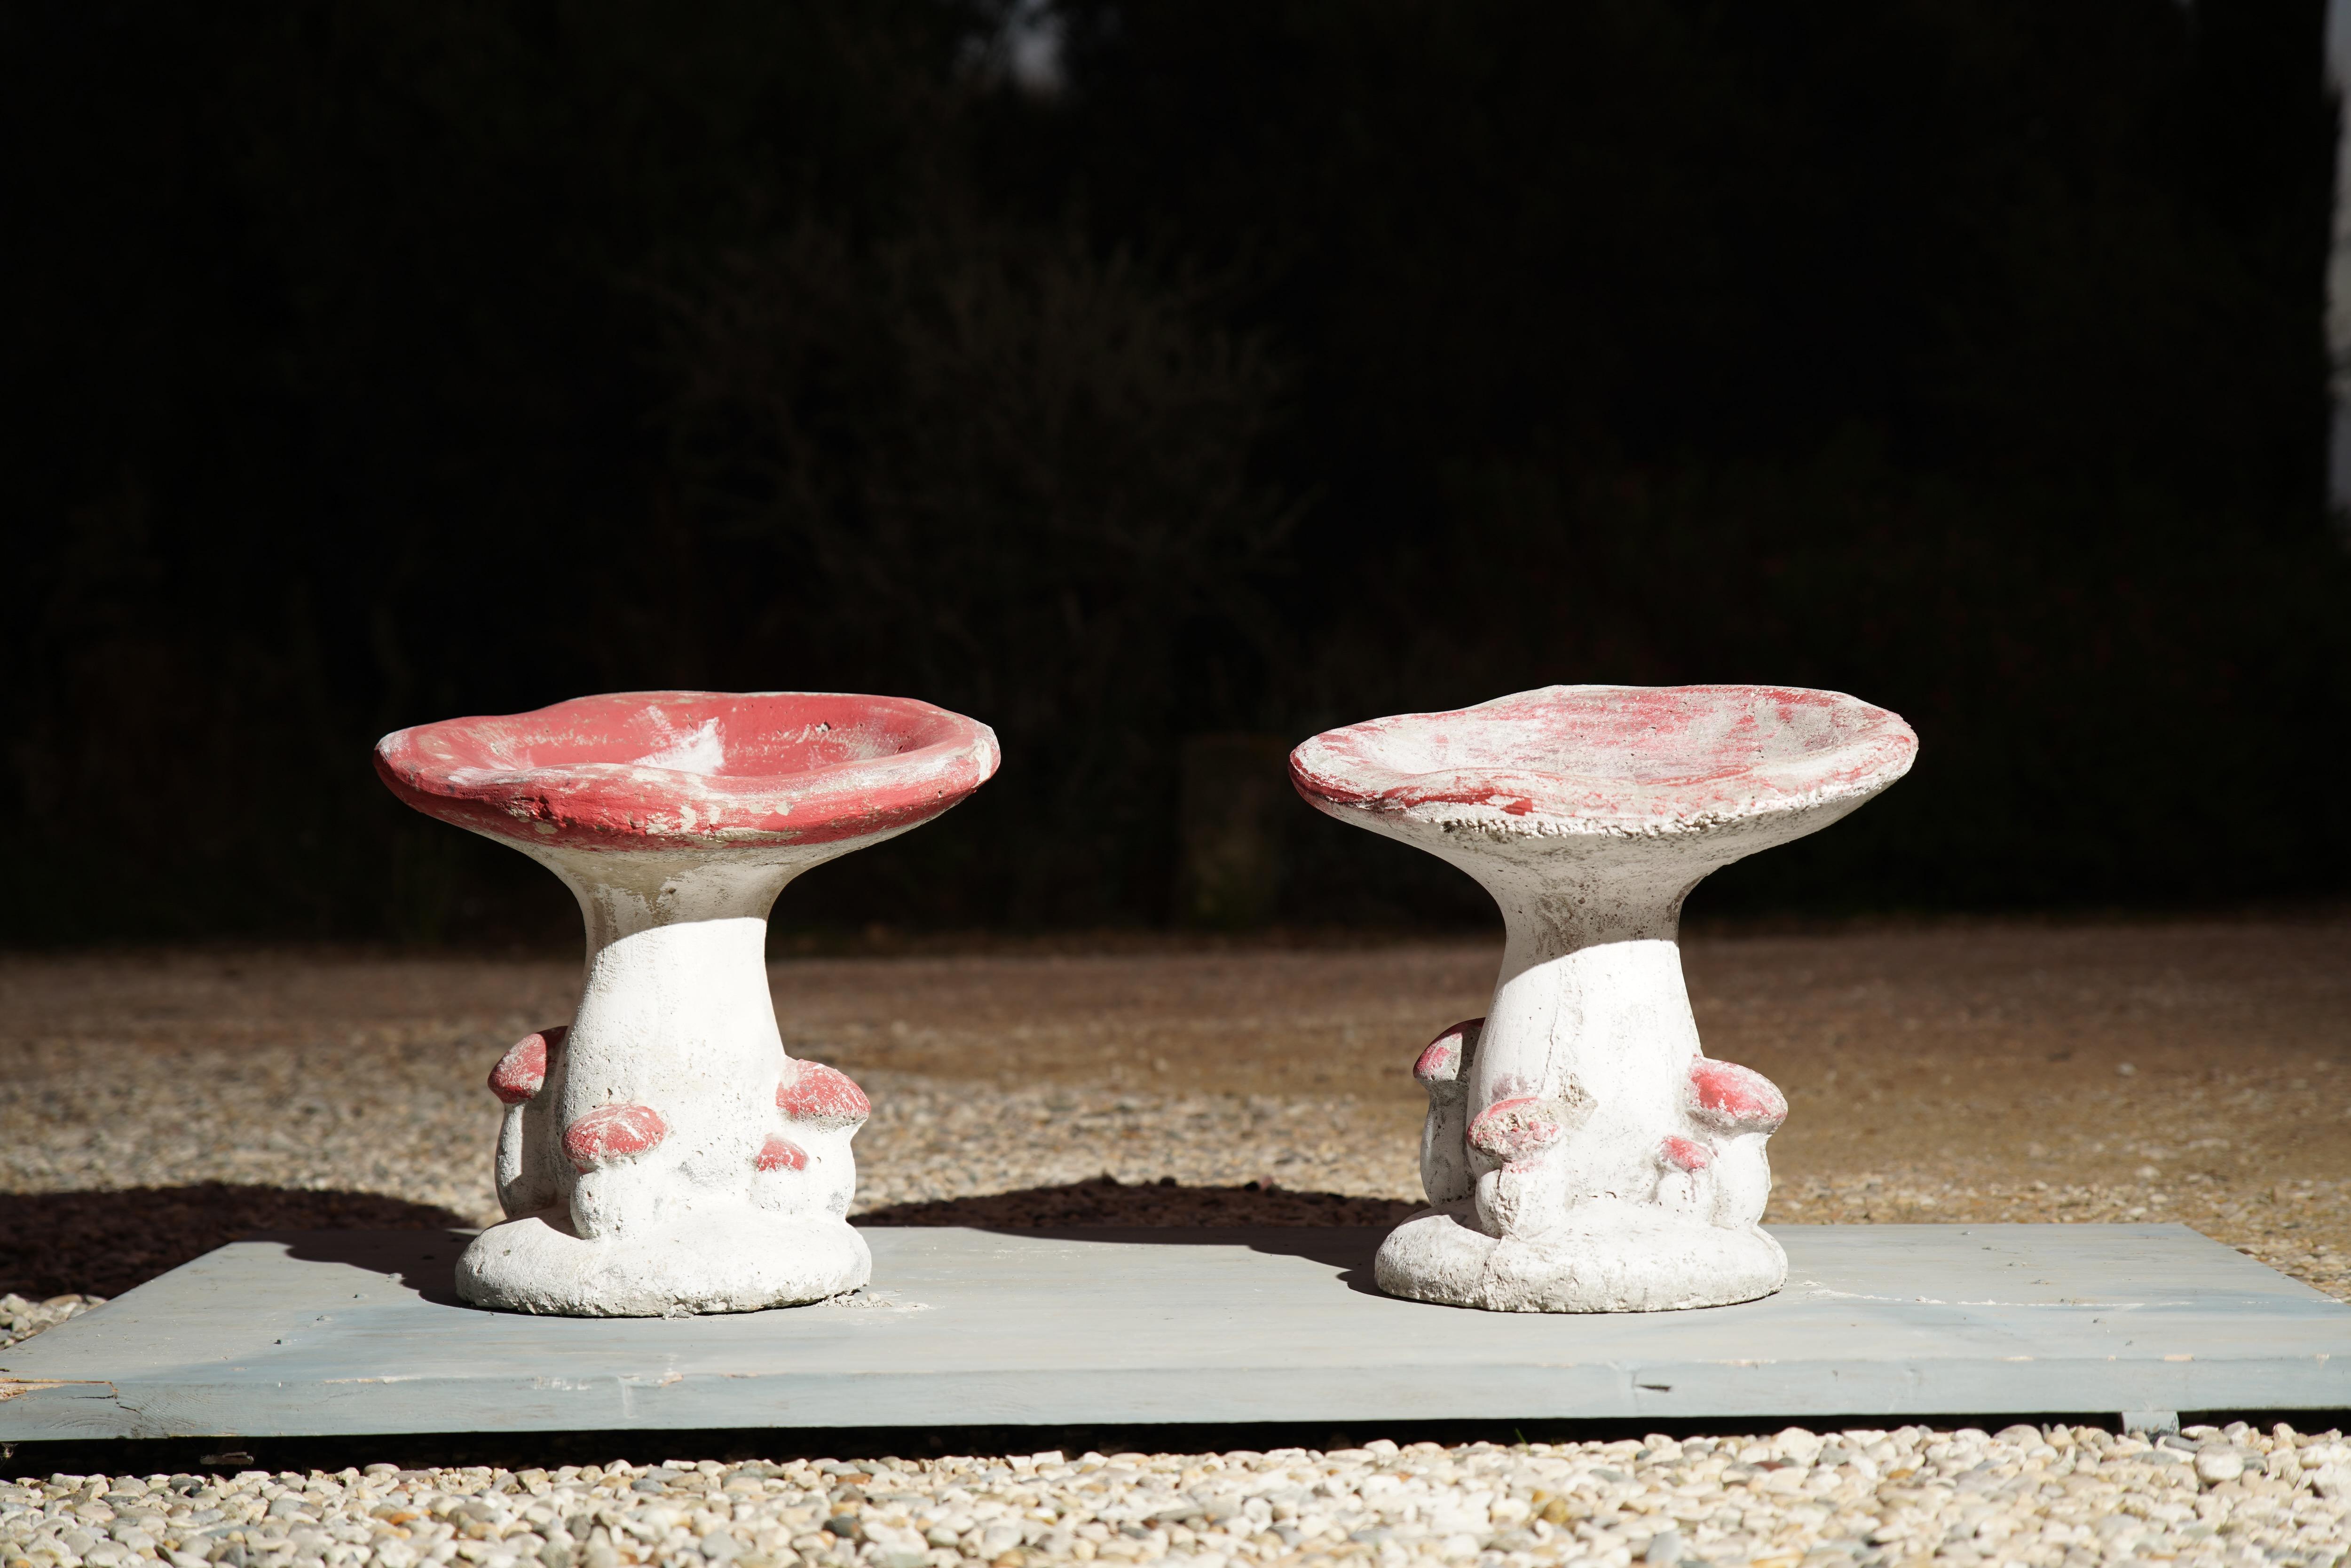 Vintage French Concrete Mushroom Stools, 1950s In Good Condition For Sale In Malibu, US